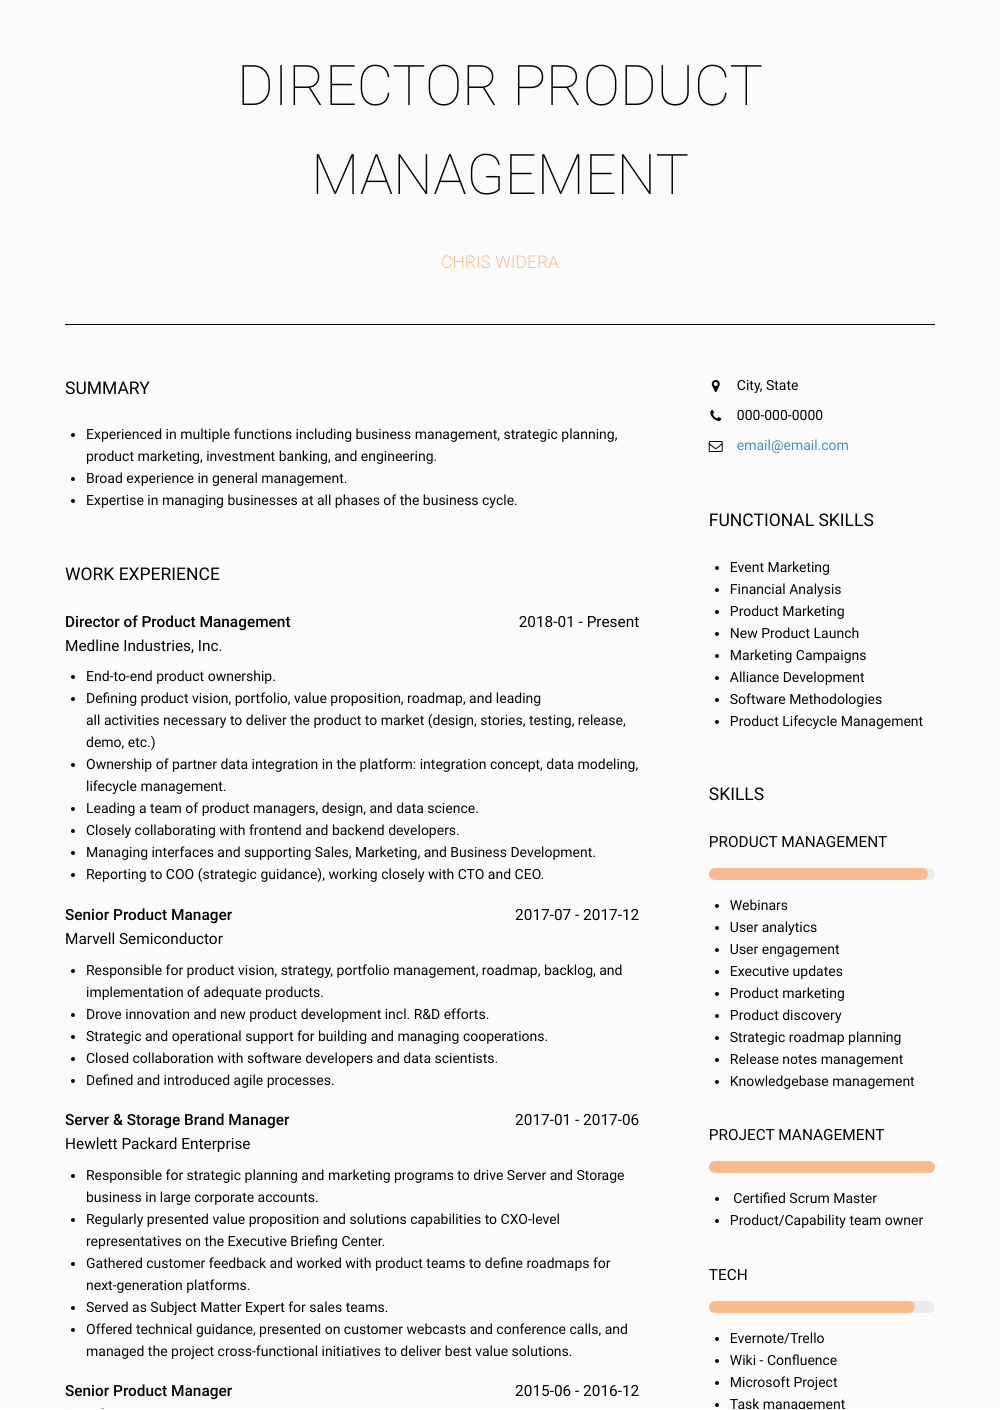 Sample Director Of Product Management Resume Senior Product Manager Resume Samples and Templates